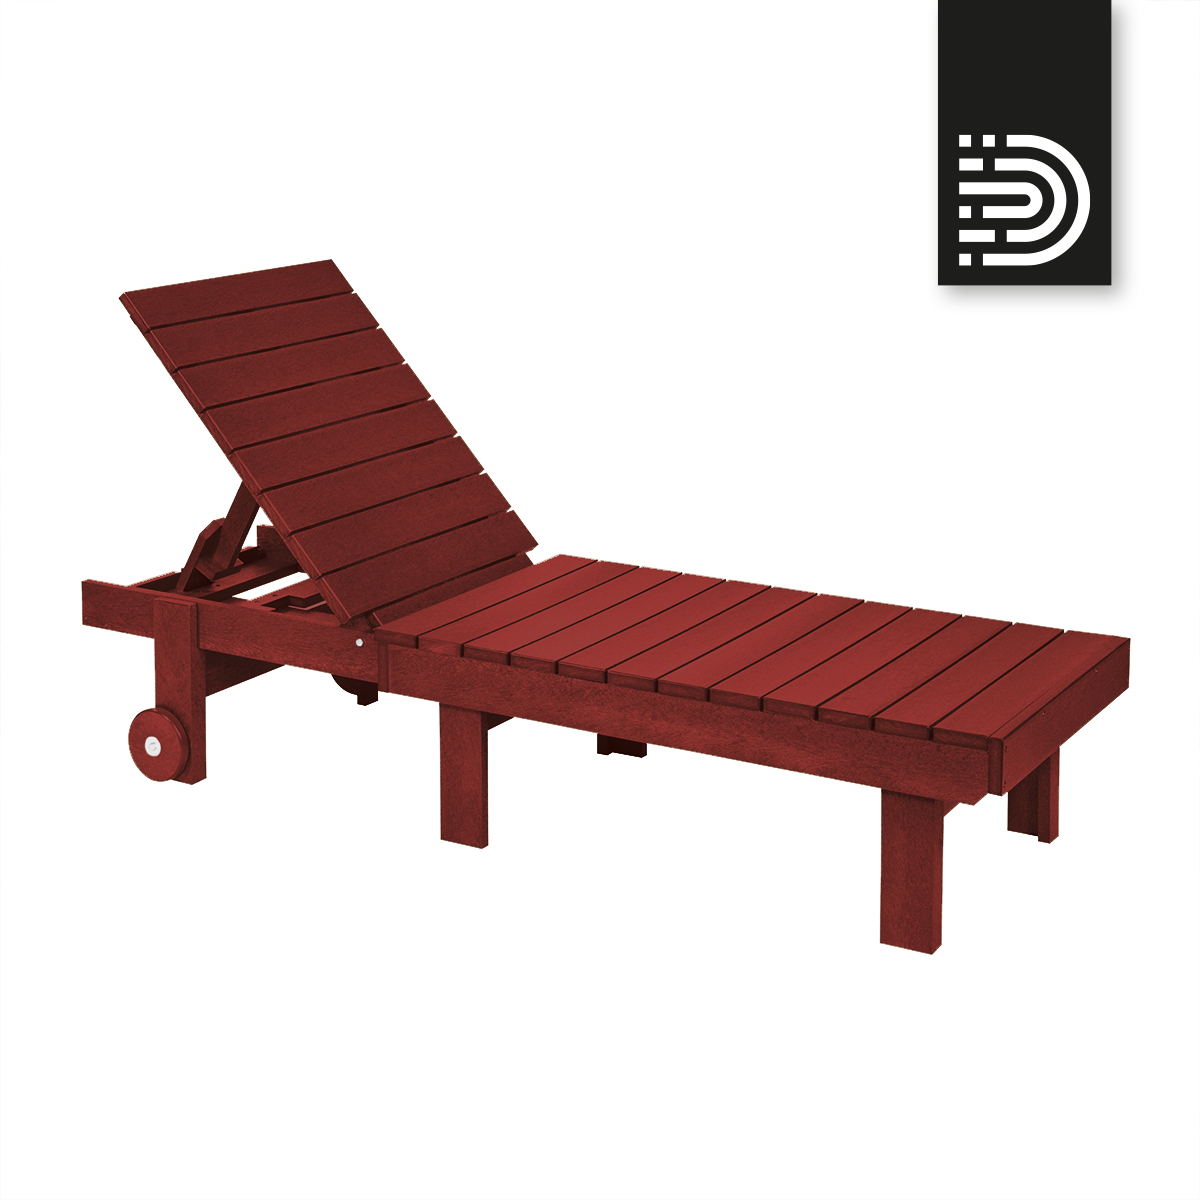 L78 Chaise Lounge with Wheels - Burgandy 05